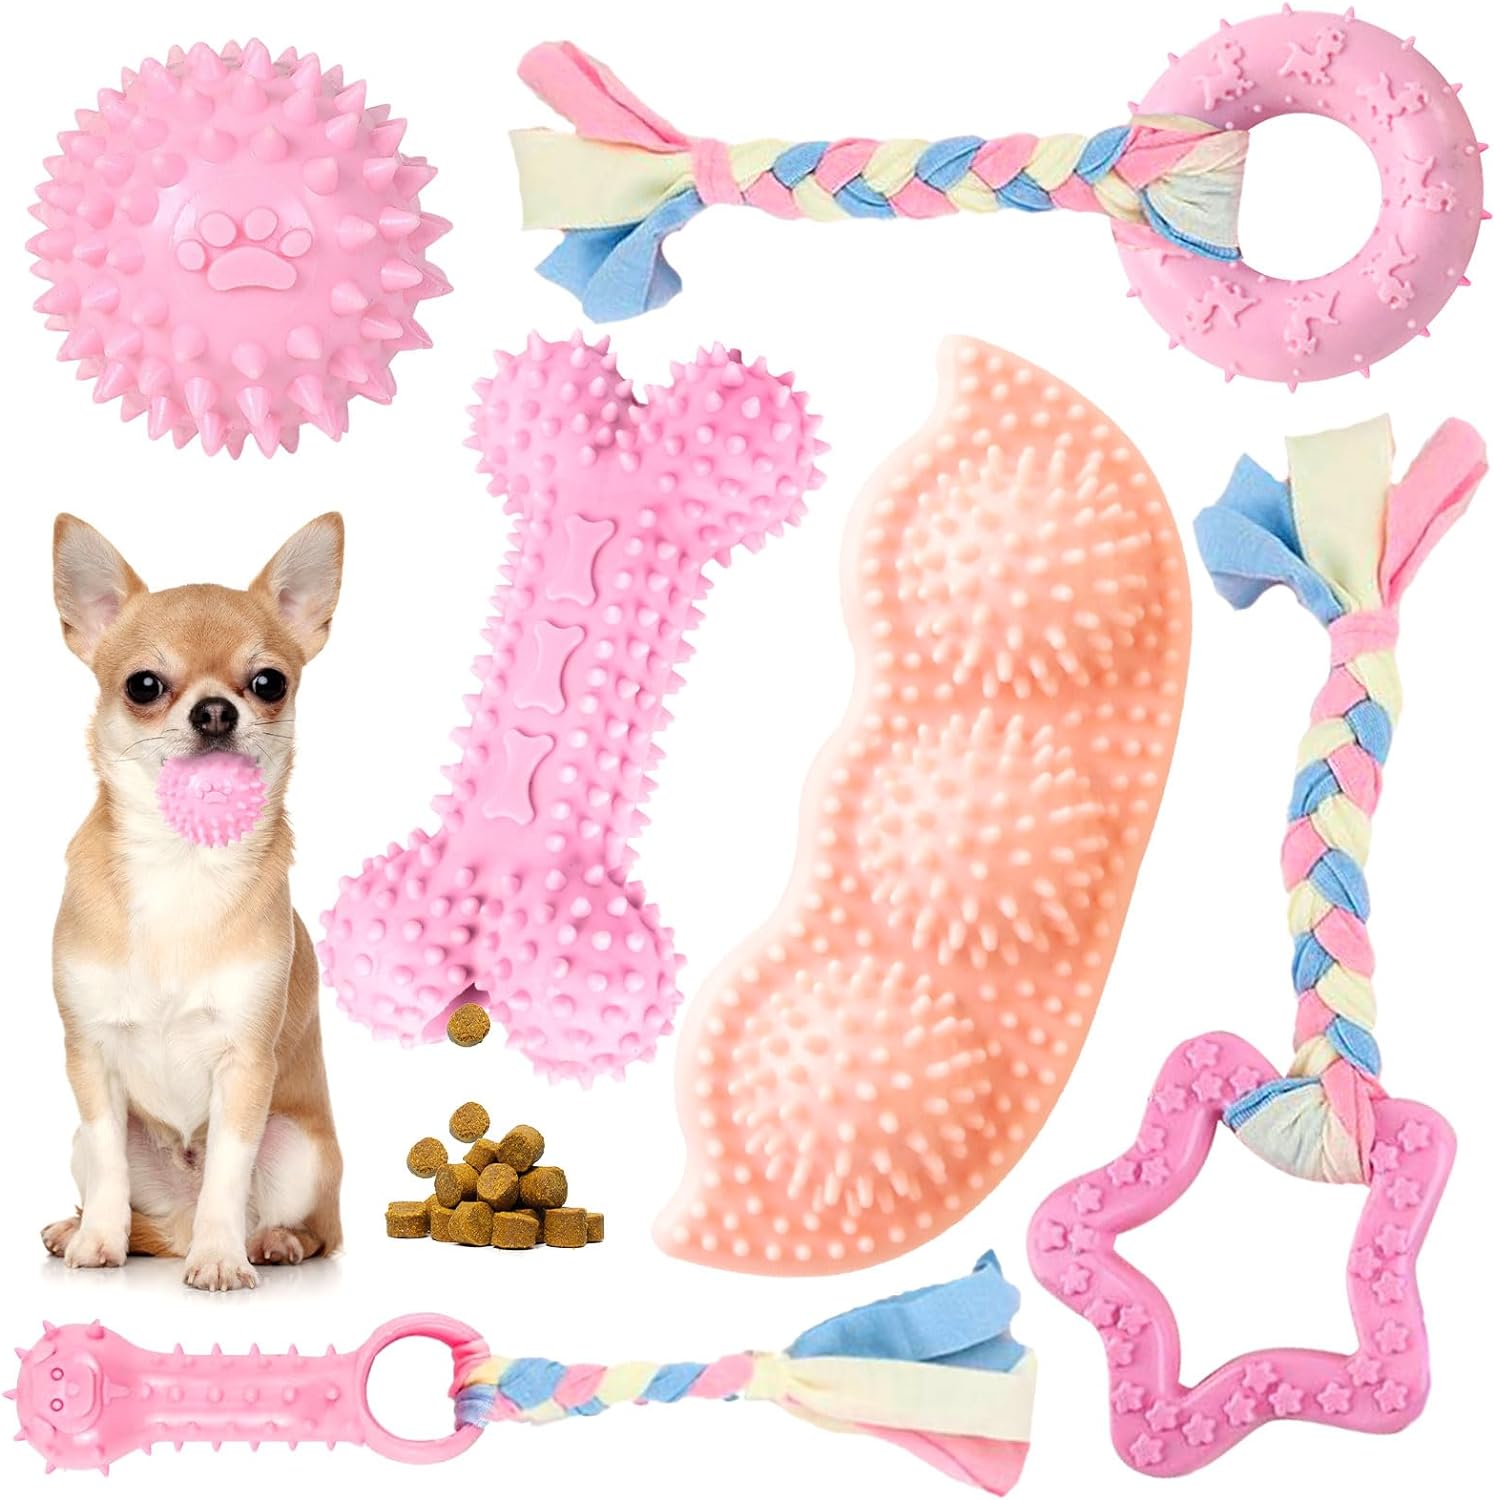 Rubber dog toys